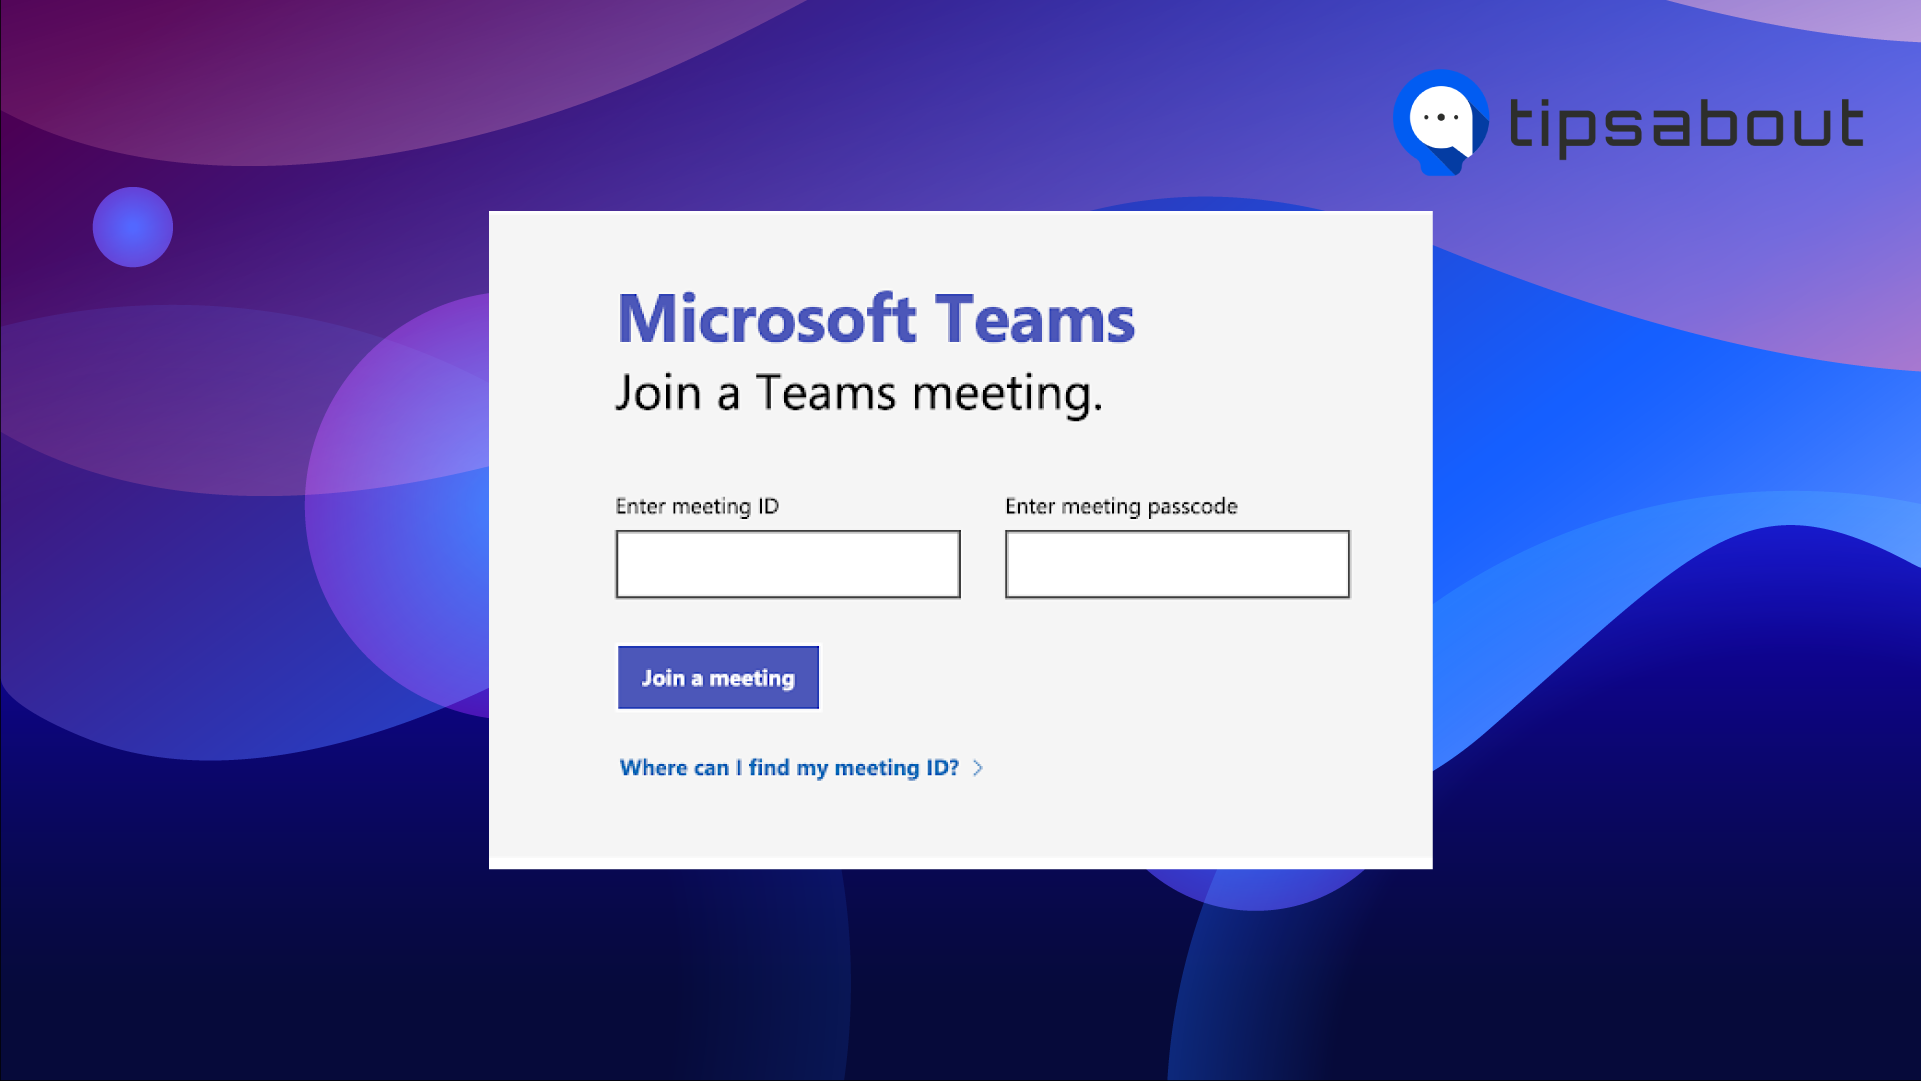 Enter MS Teams meeting ID and passcode